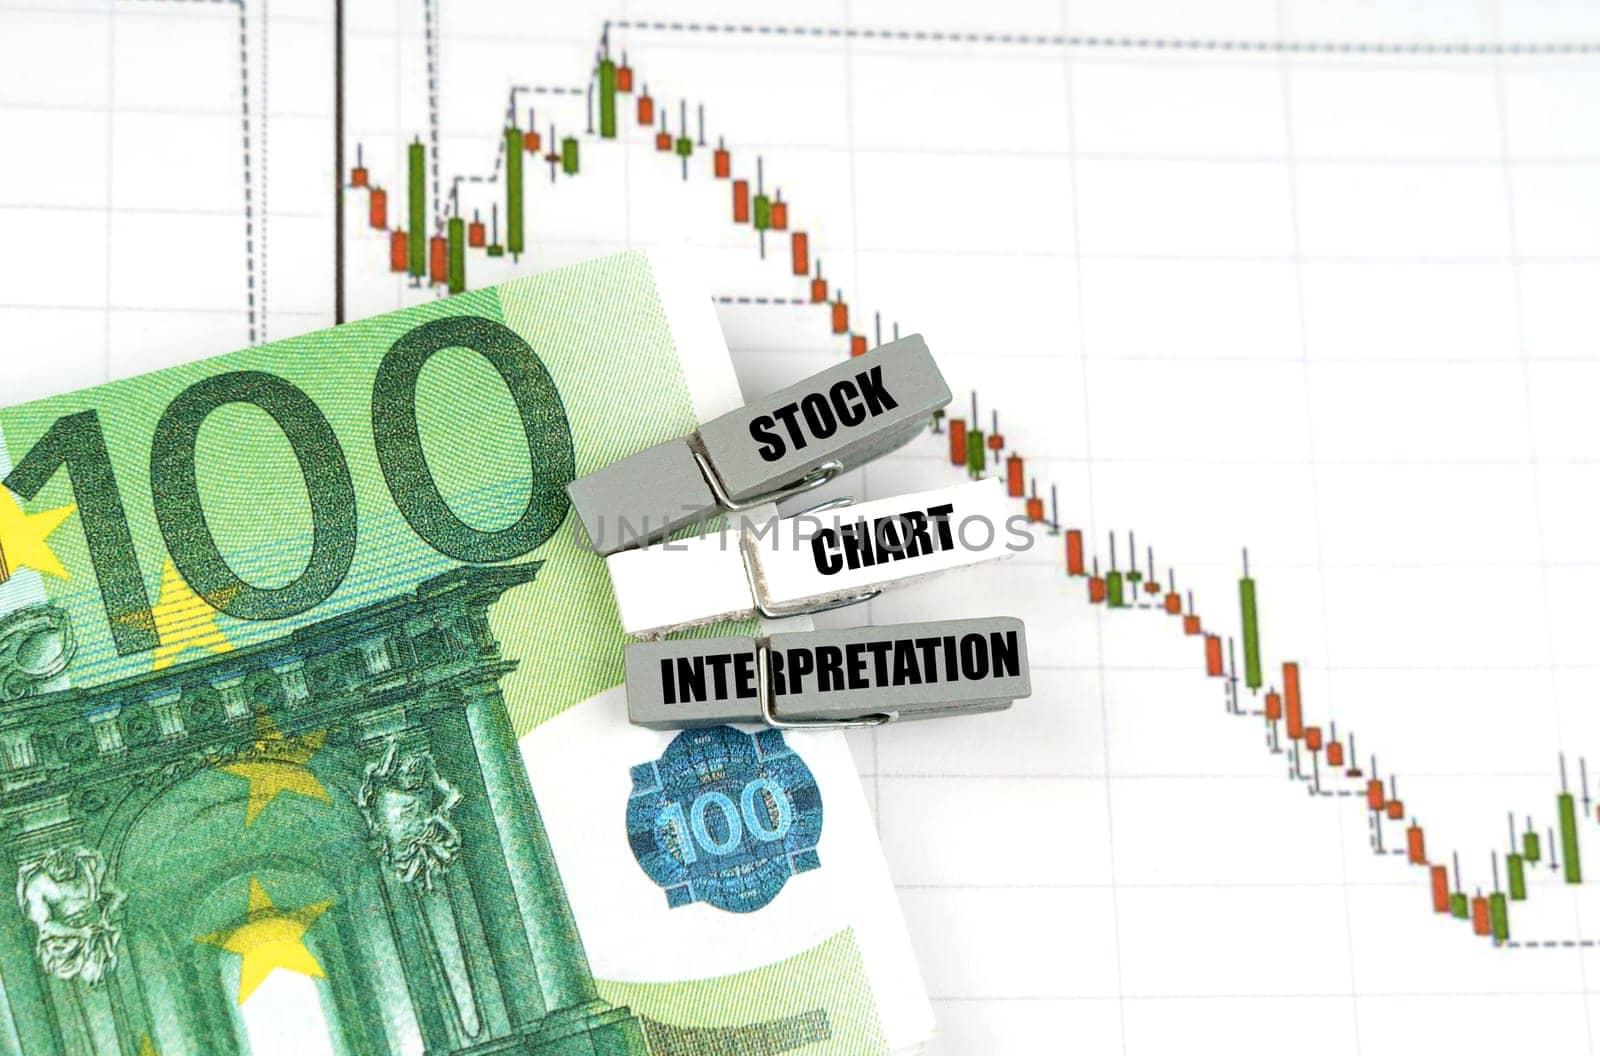 Business concept. On the quote chart there are euros and clothespins with the inscription - Stock Chart Interpretation